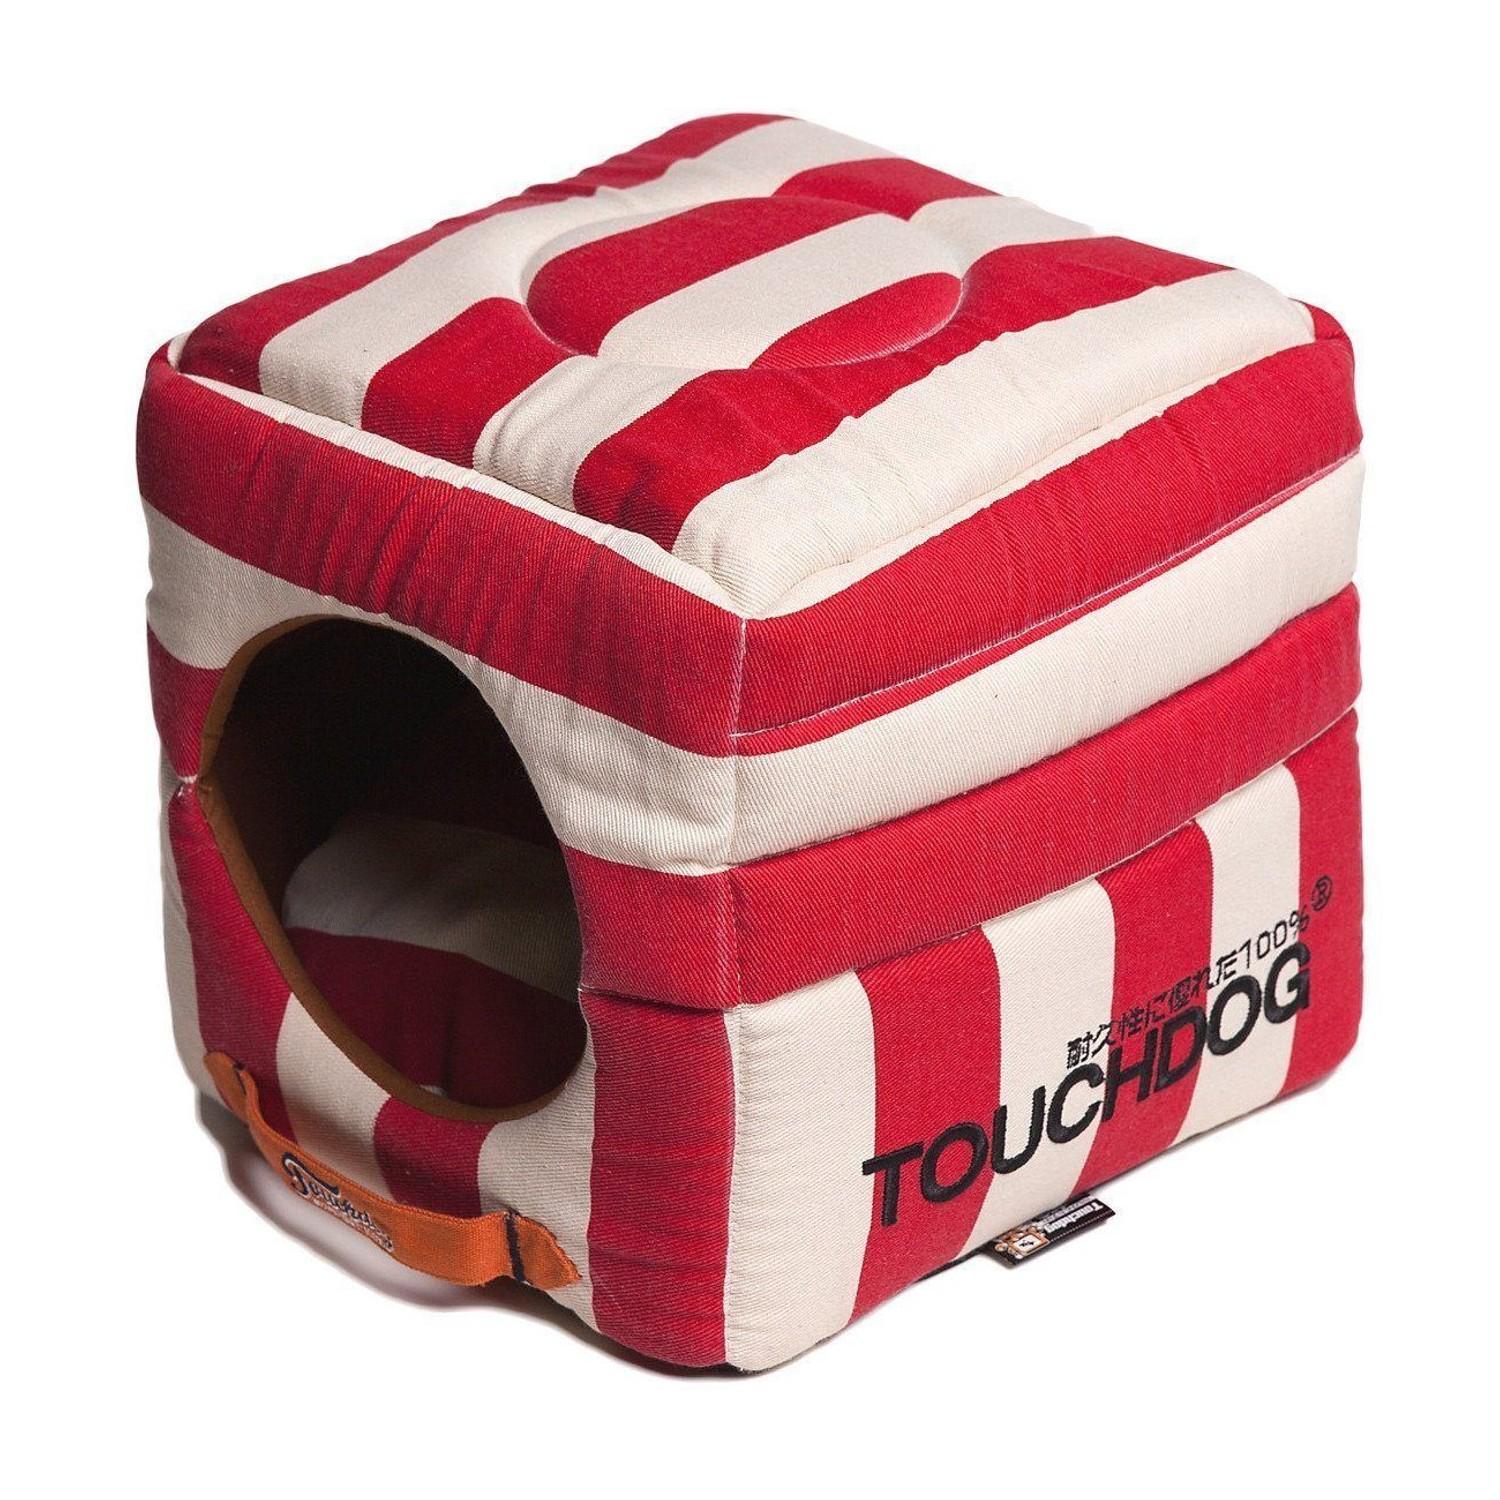 Pet Life Touchdog Polo-Striped 2-in-1 Collapsible Dog and Cat Bed - Red and White